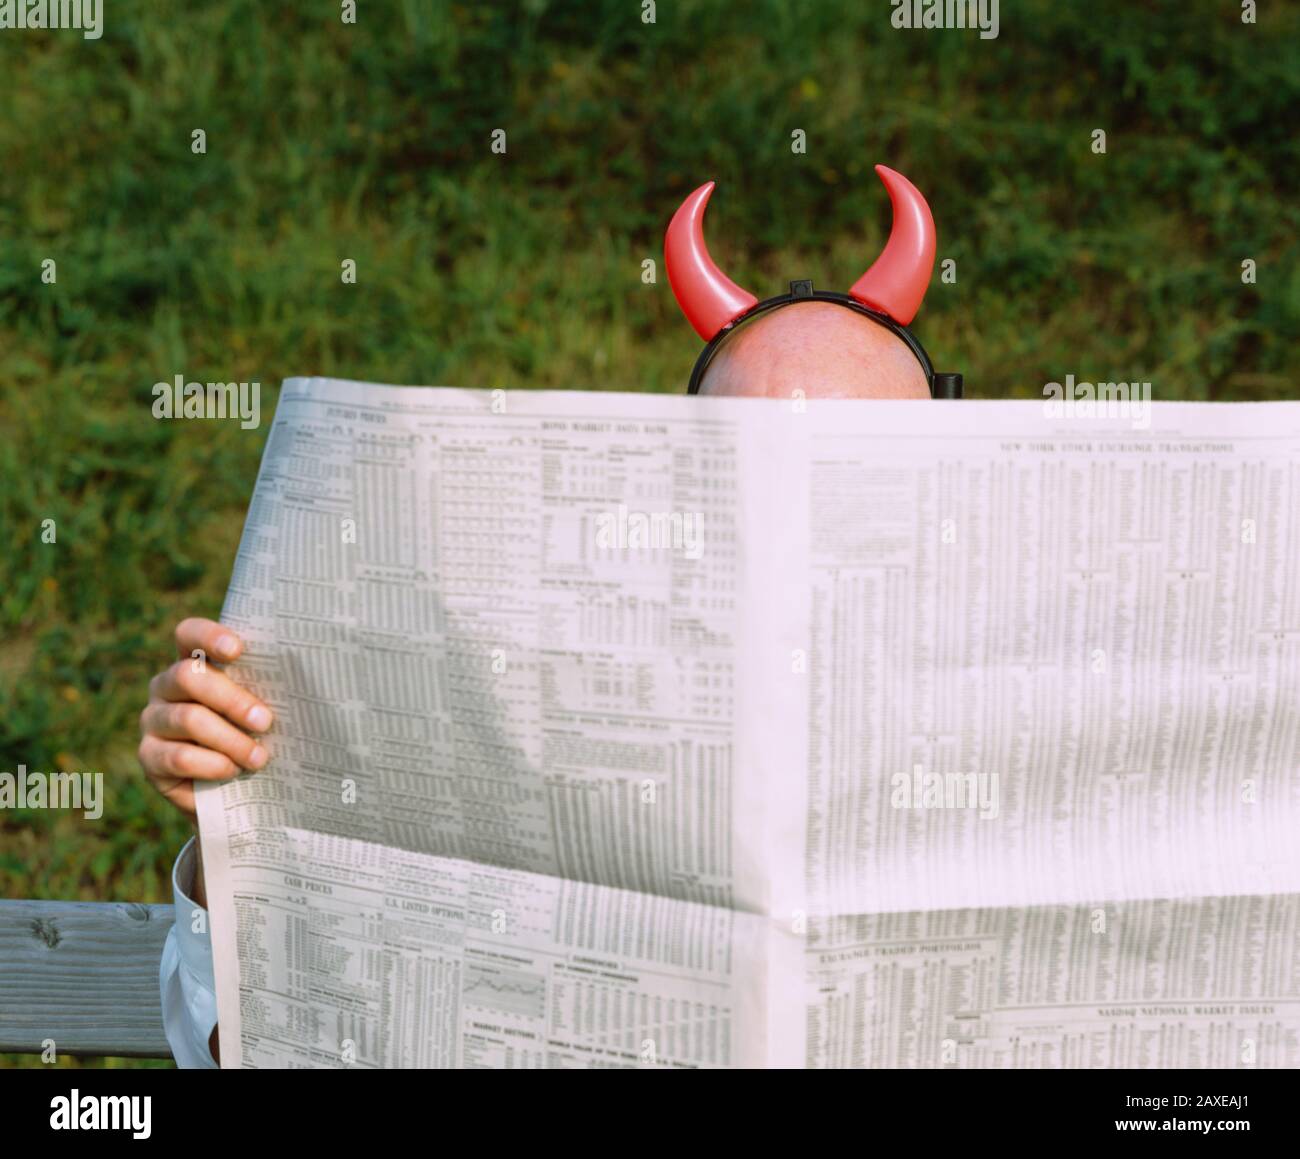 Man with devil horns reading a newspaper, Germany Stock Photo